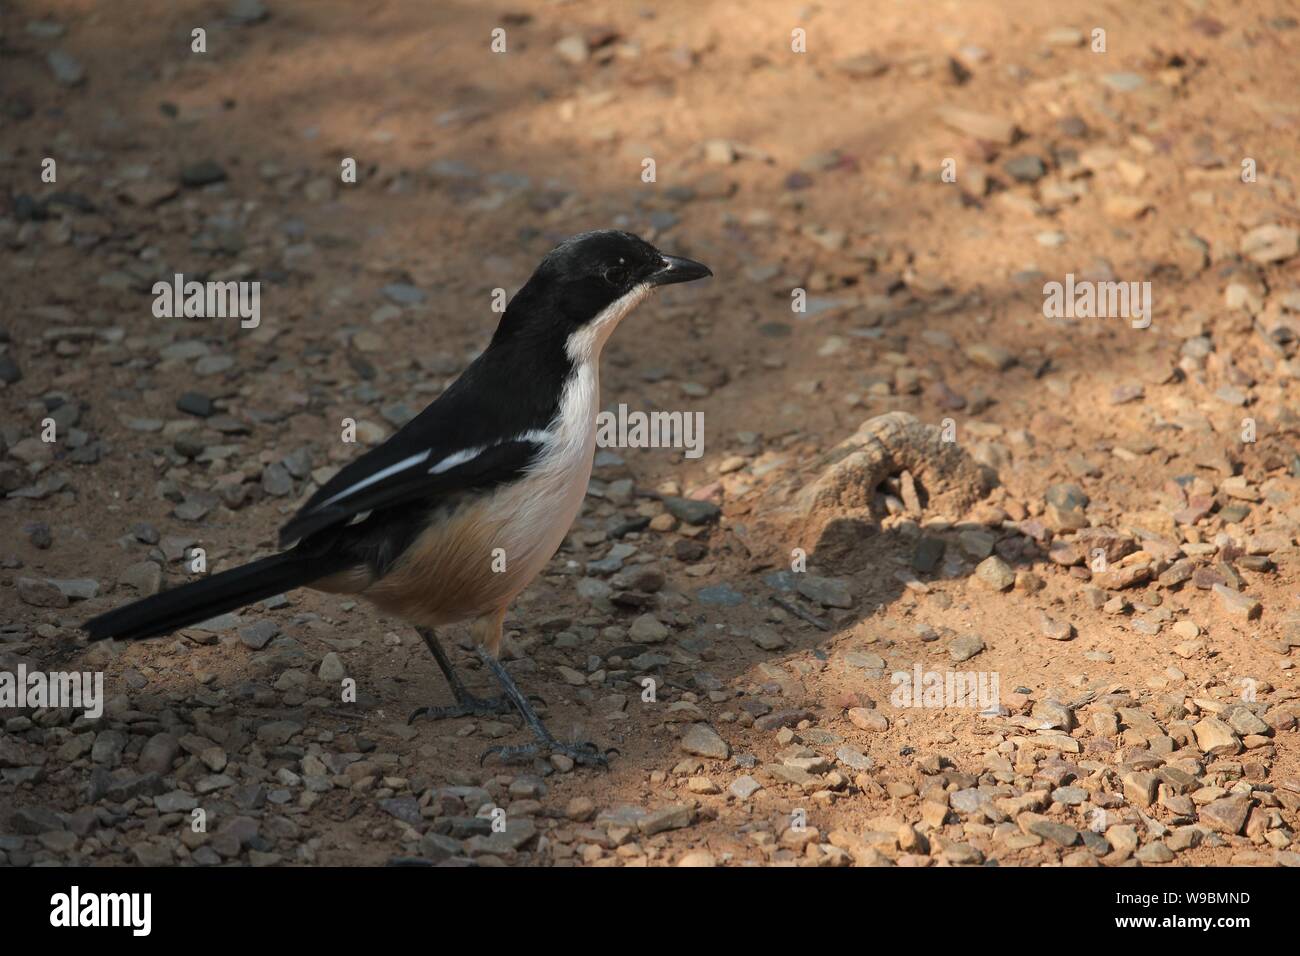 A Southern Boubou (Laniarius ferrugineus) at Addo Elephant National Park, Eastern Cape, South Africa Stock Photo